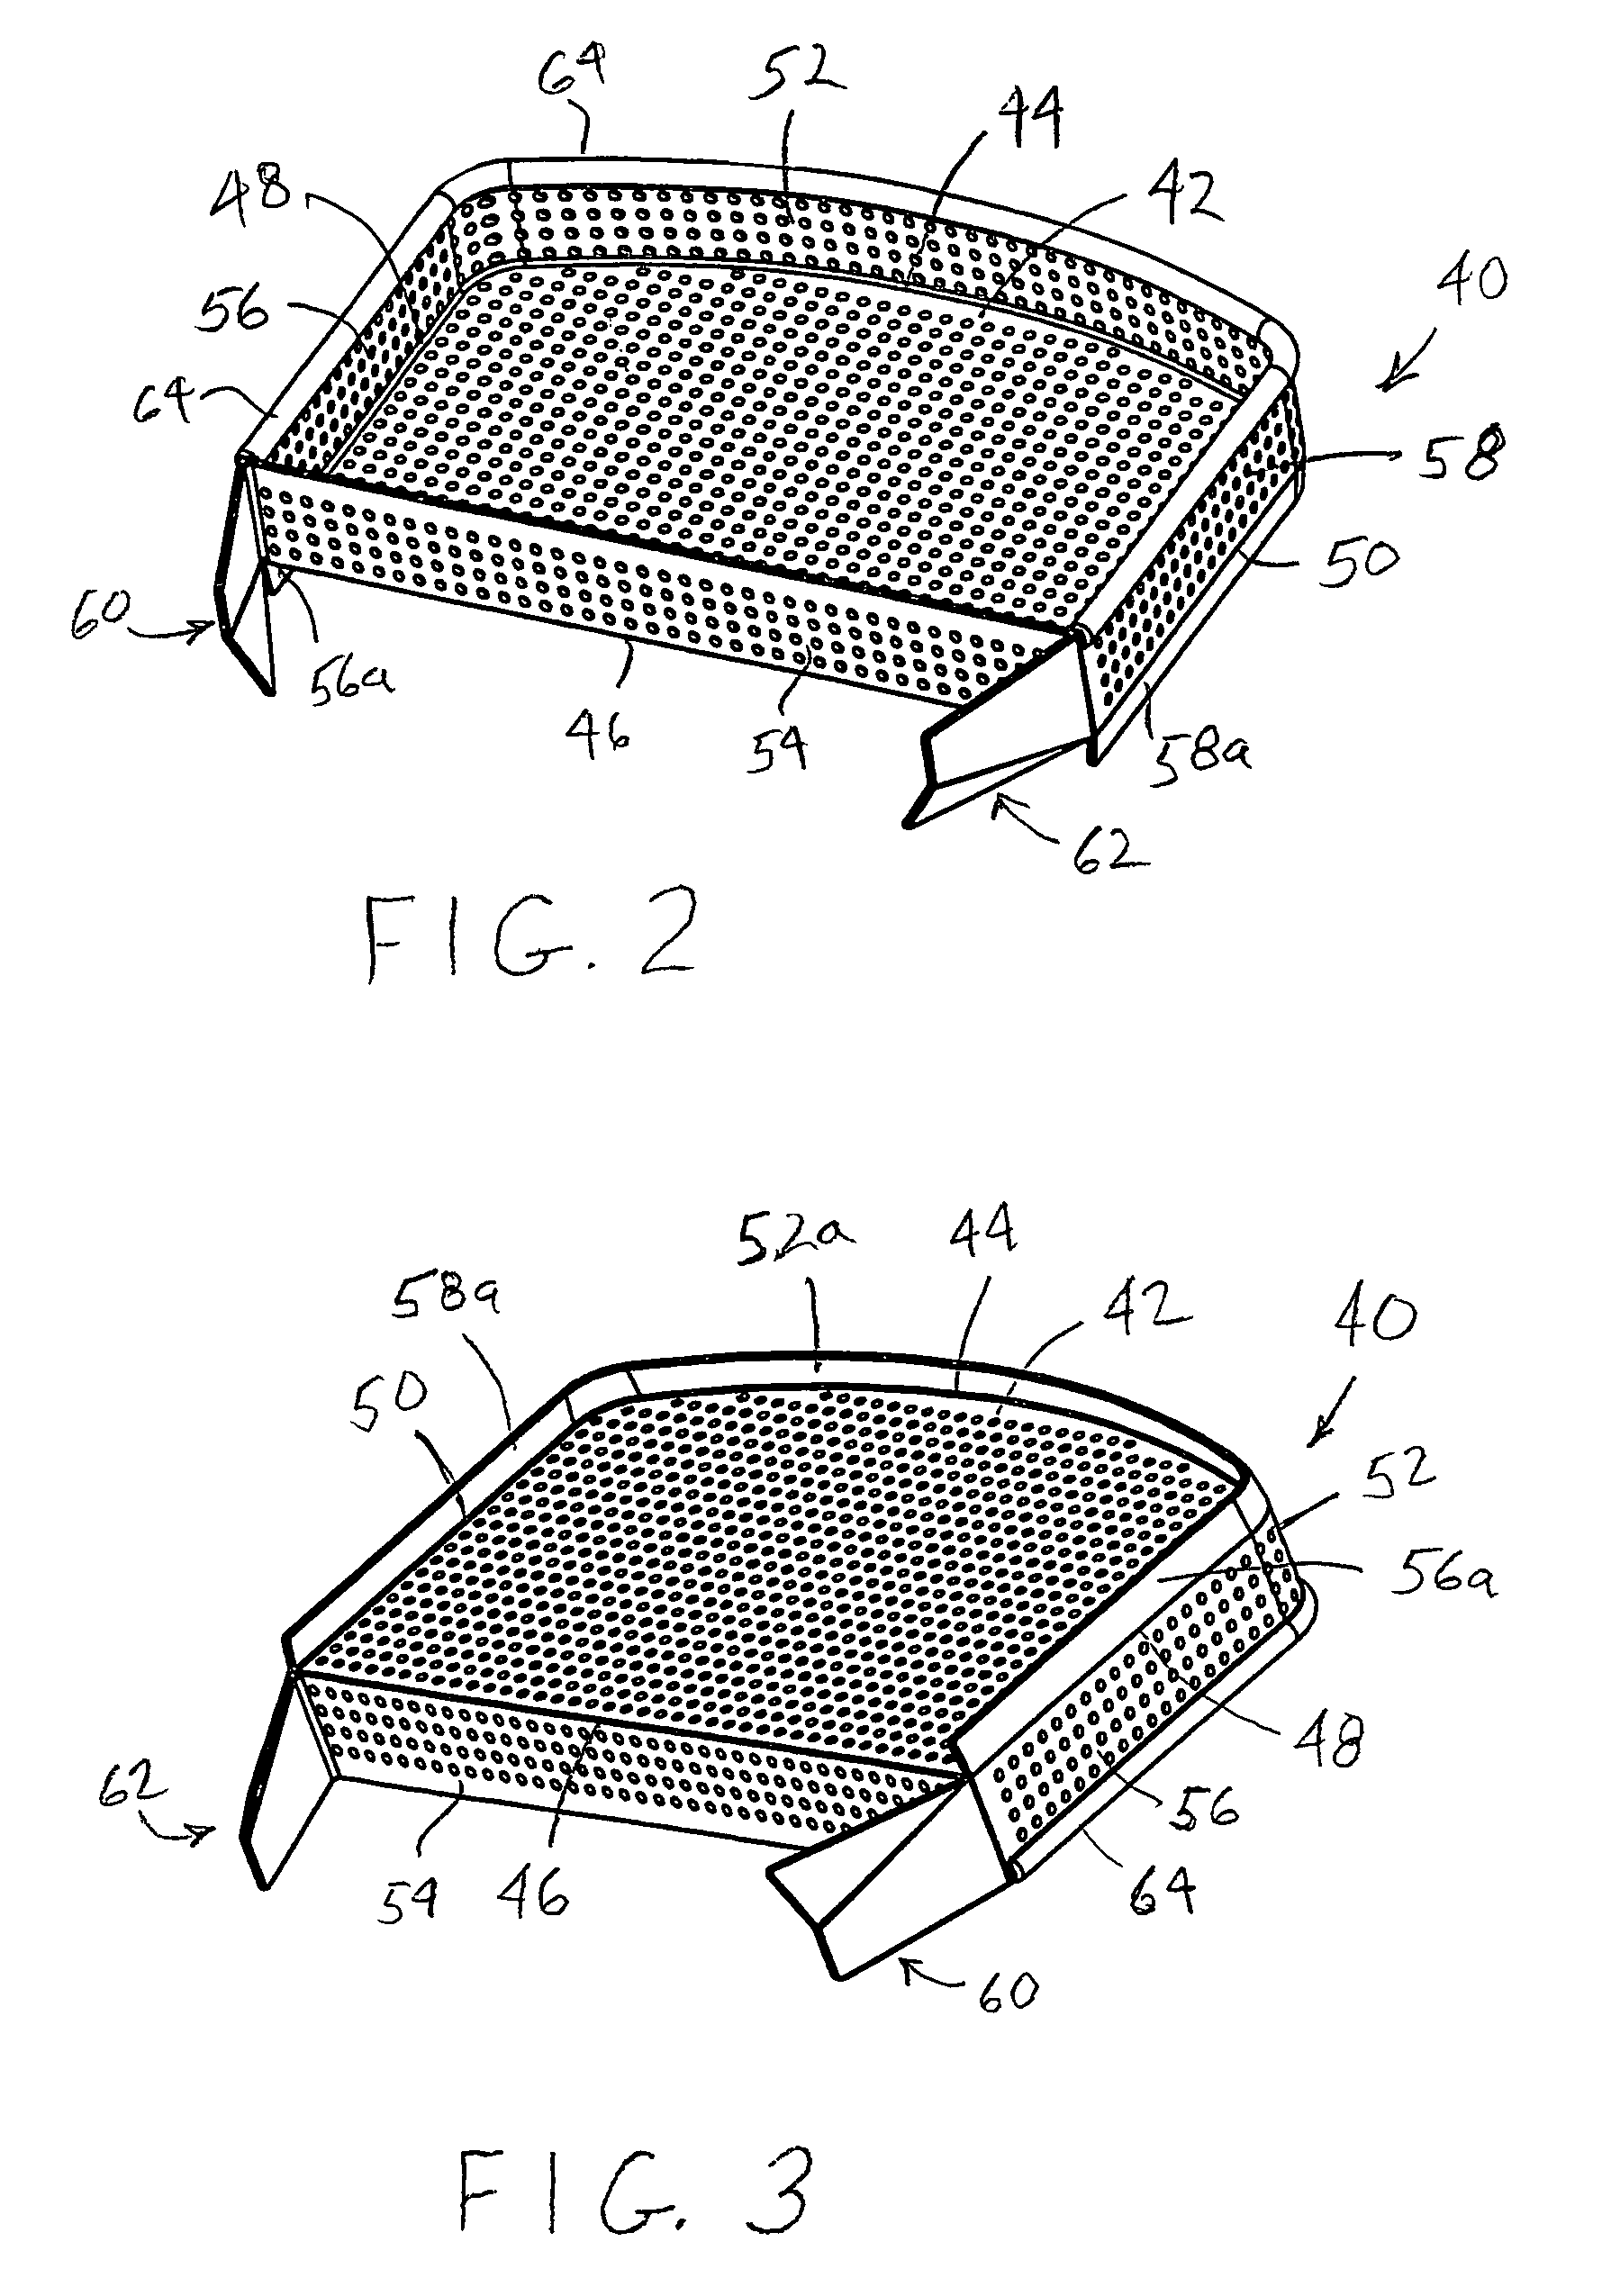 Drainage tray for shampooing bowls